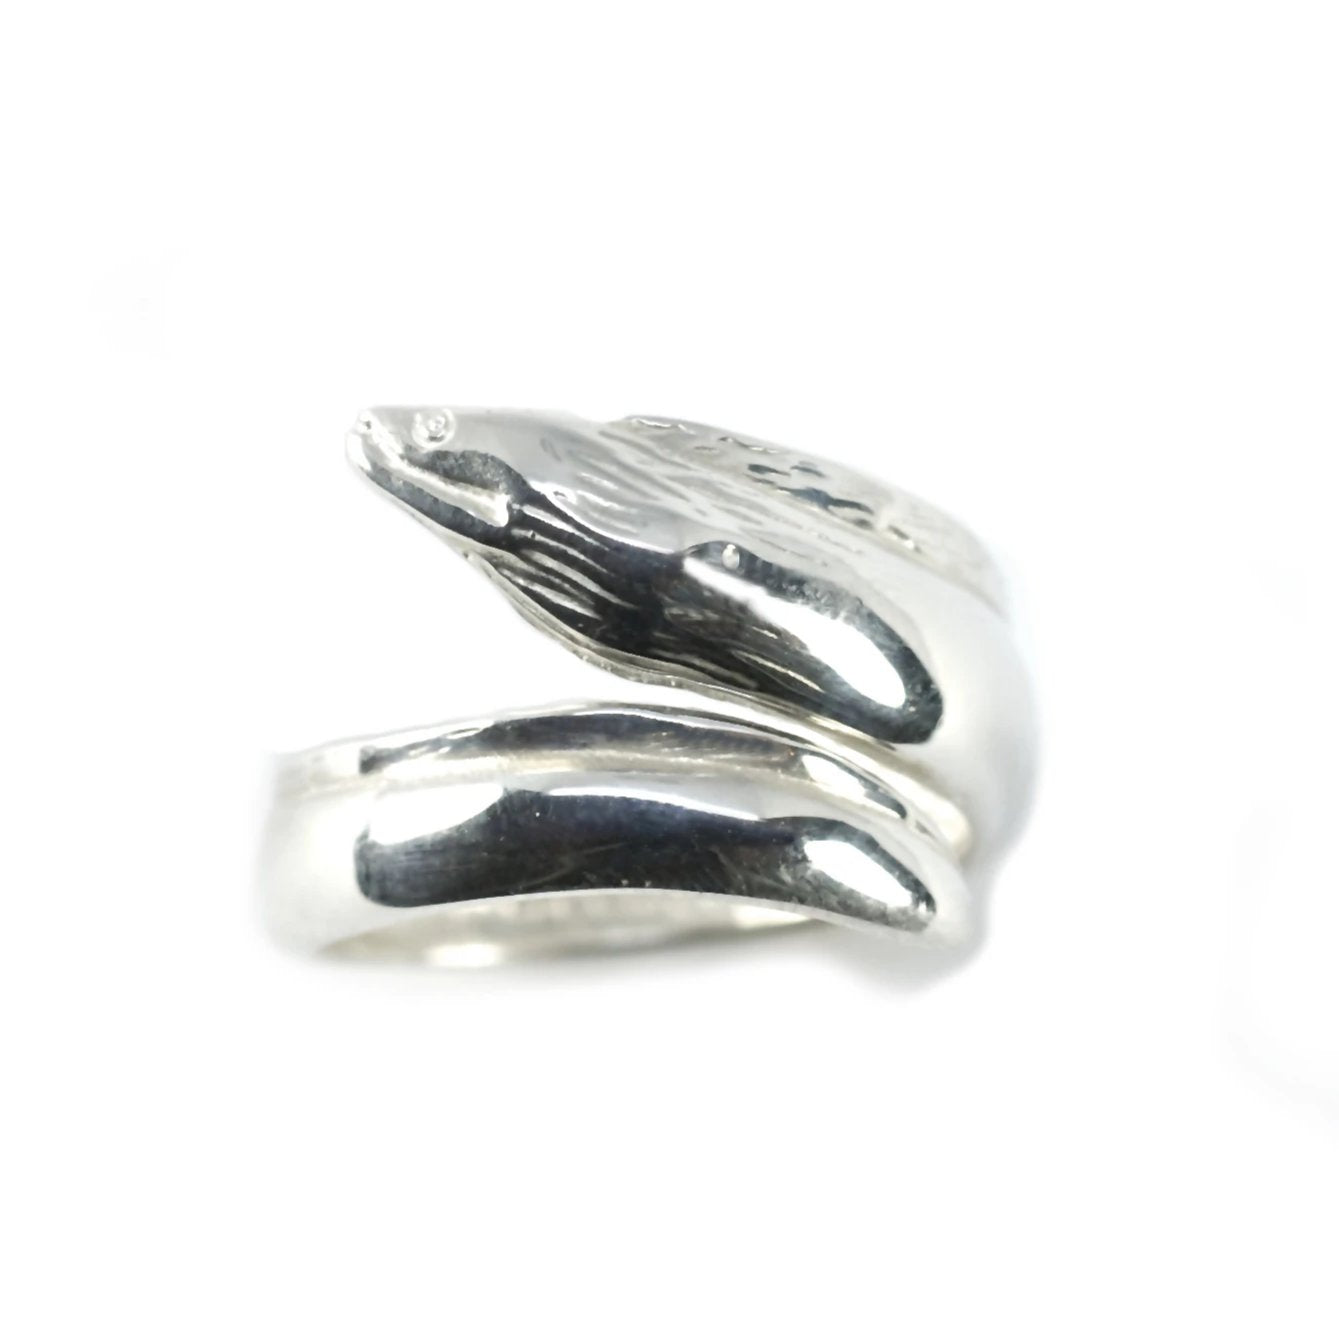 Moray Eel Sterling Silver Ring Sea Life Ring Scuba Diving Jewelry - The Tool Store